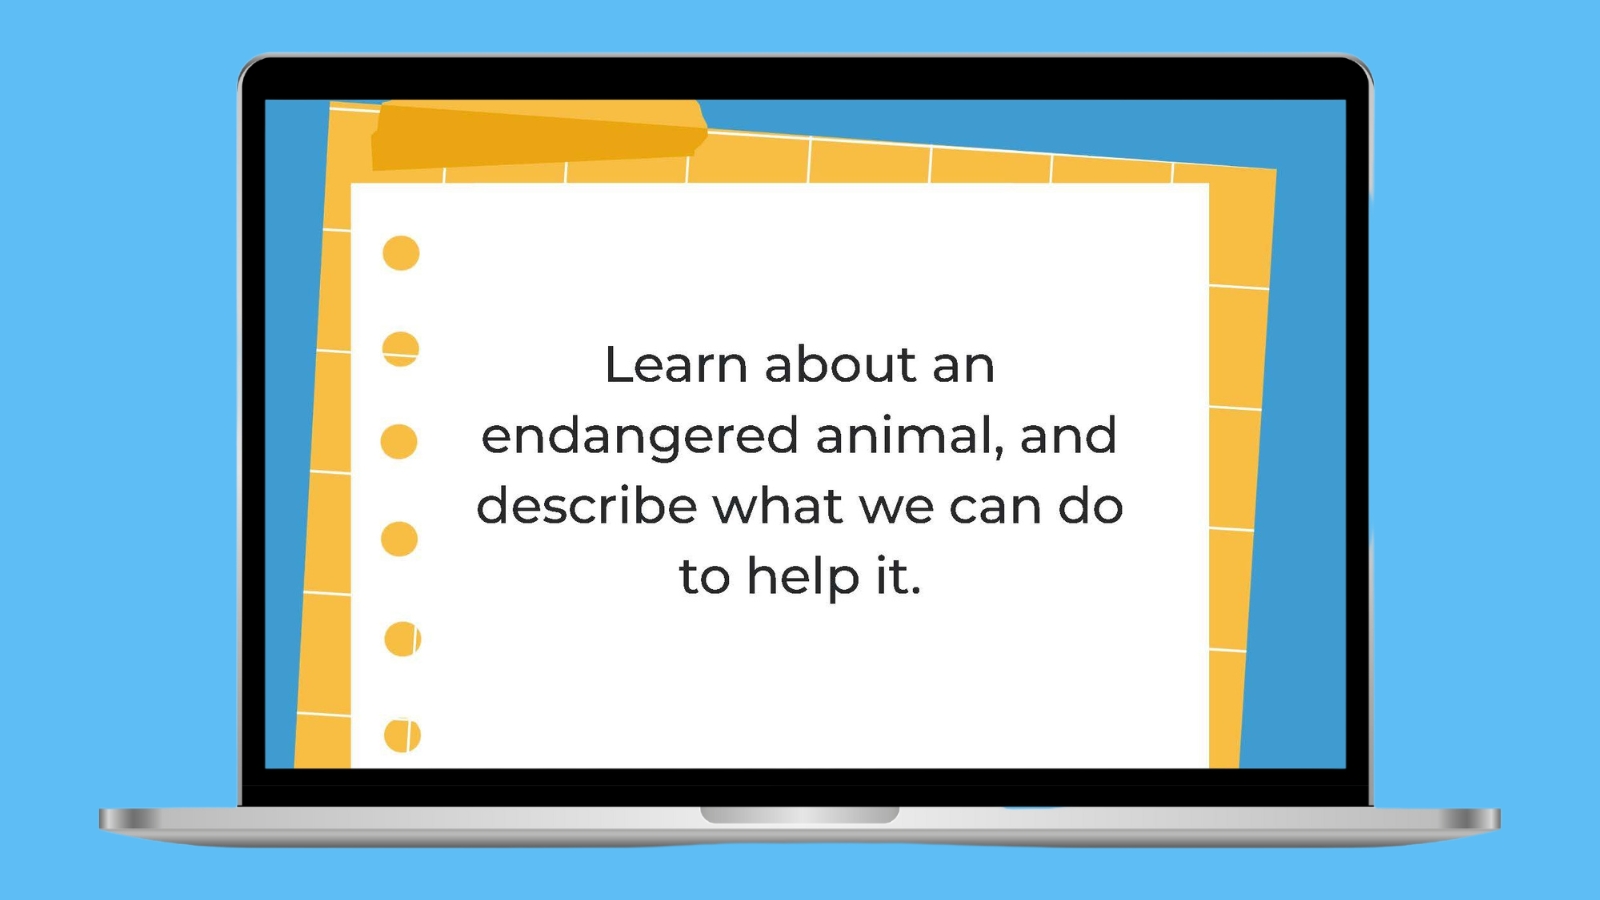 Learn about an endangered animal, and describe what we can do to help it.